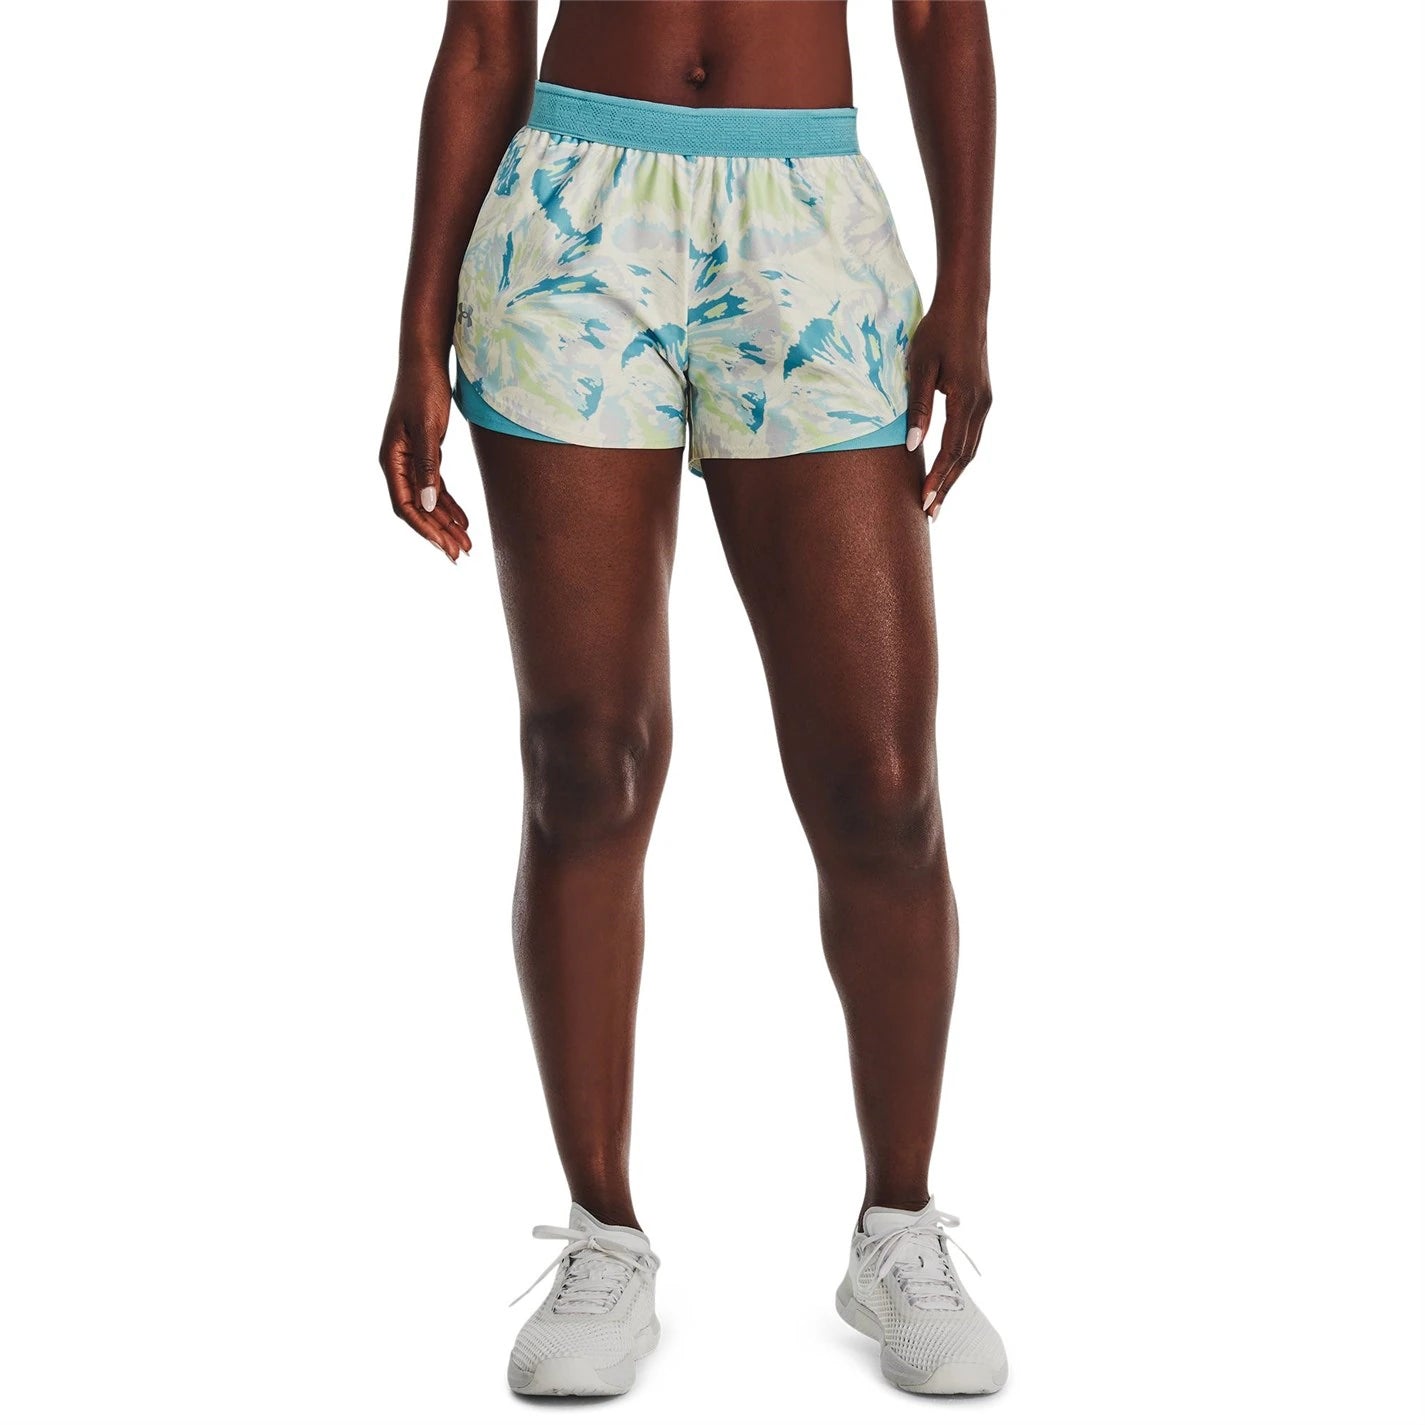 UNDER ARMOUR WOMEN'S PLAY UP SHORTS - FLORAL BLUE